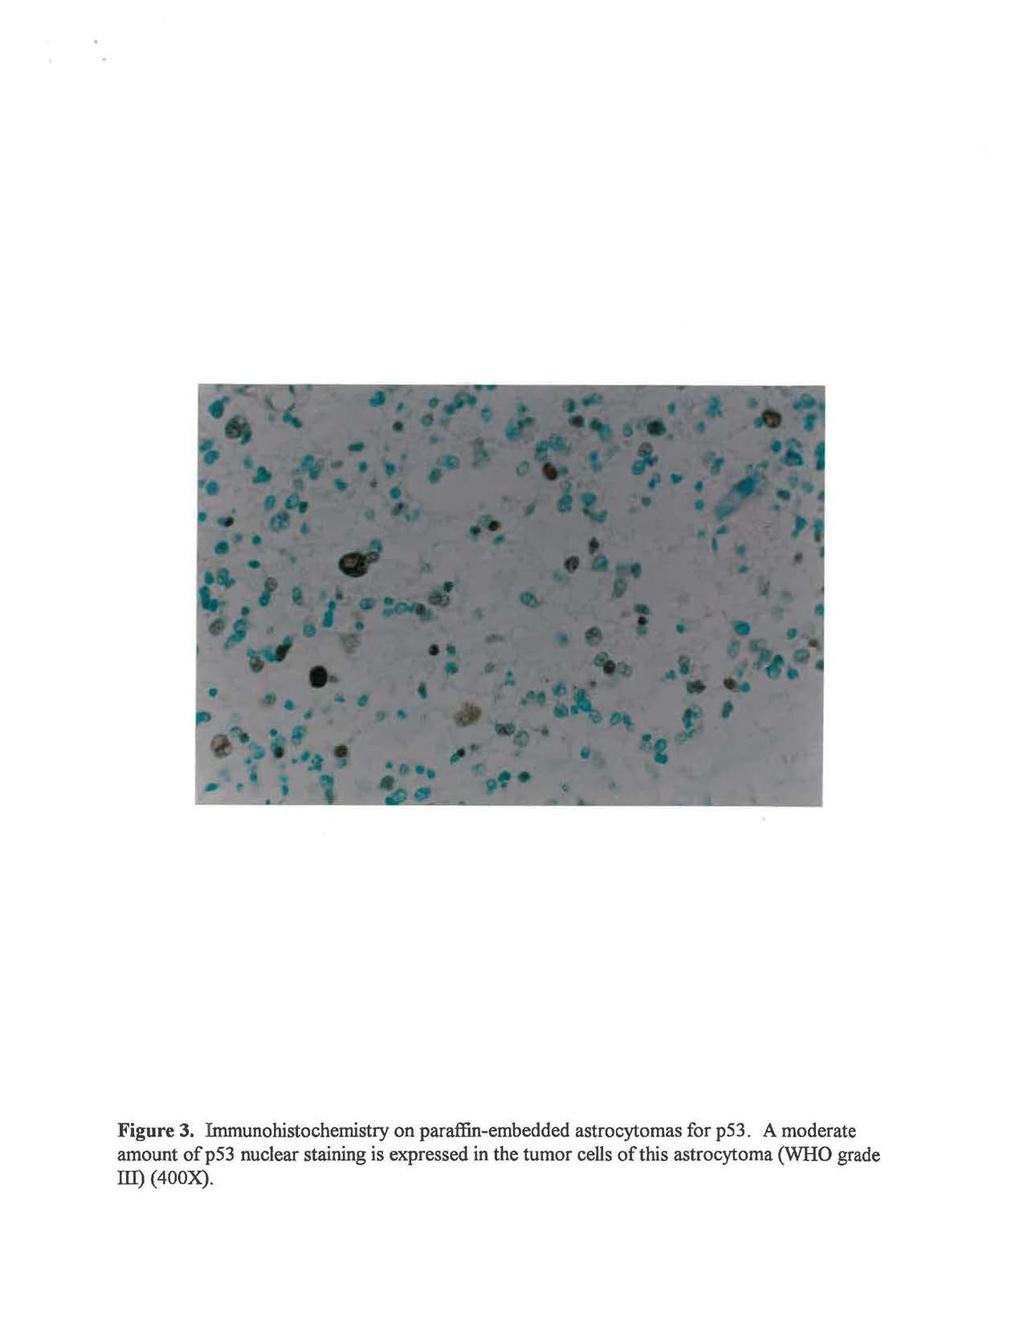 Figure 3. Immunohistochemistry on paraffin-embedded astrocytomas for p53.